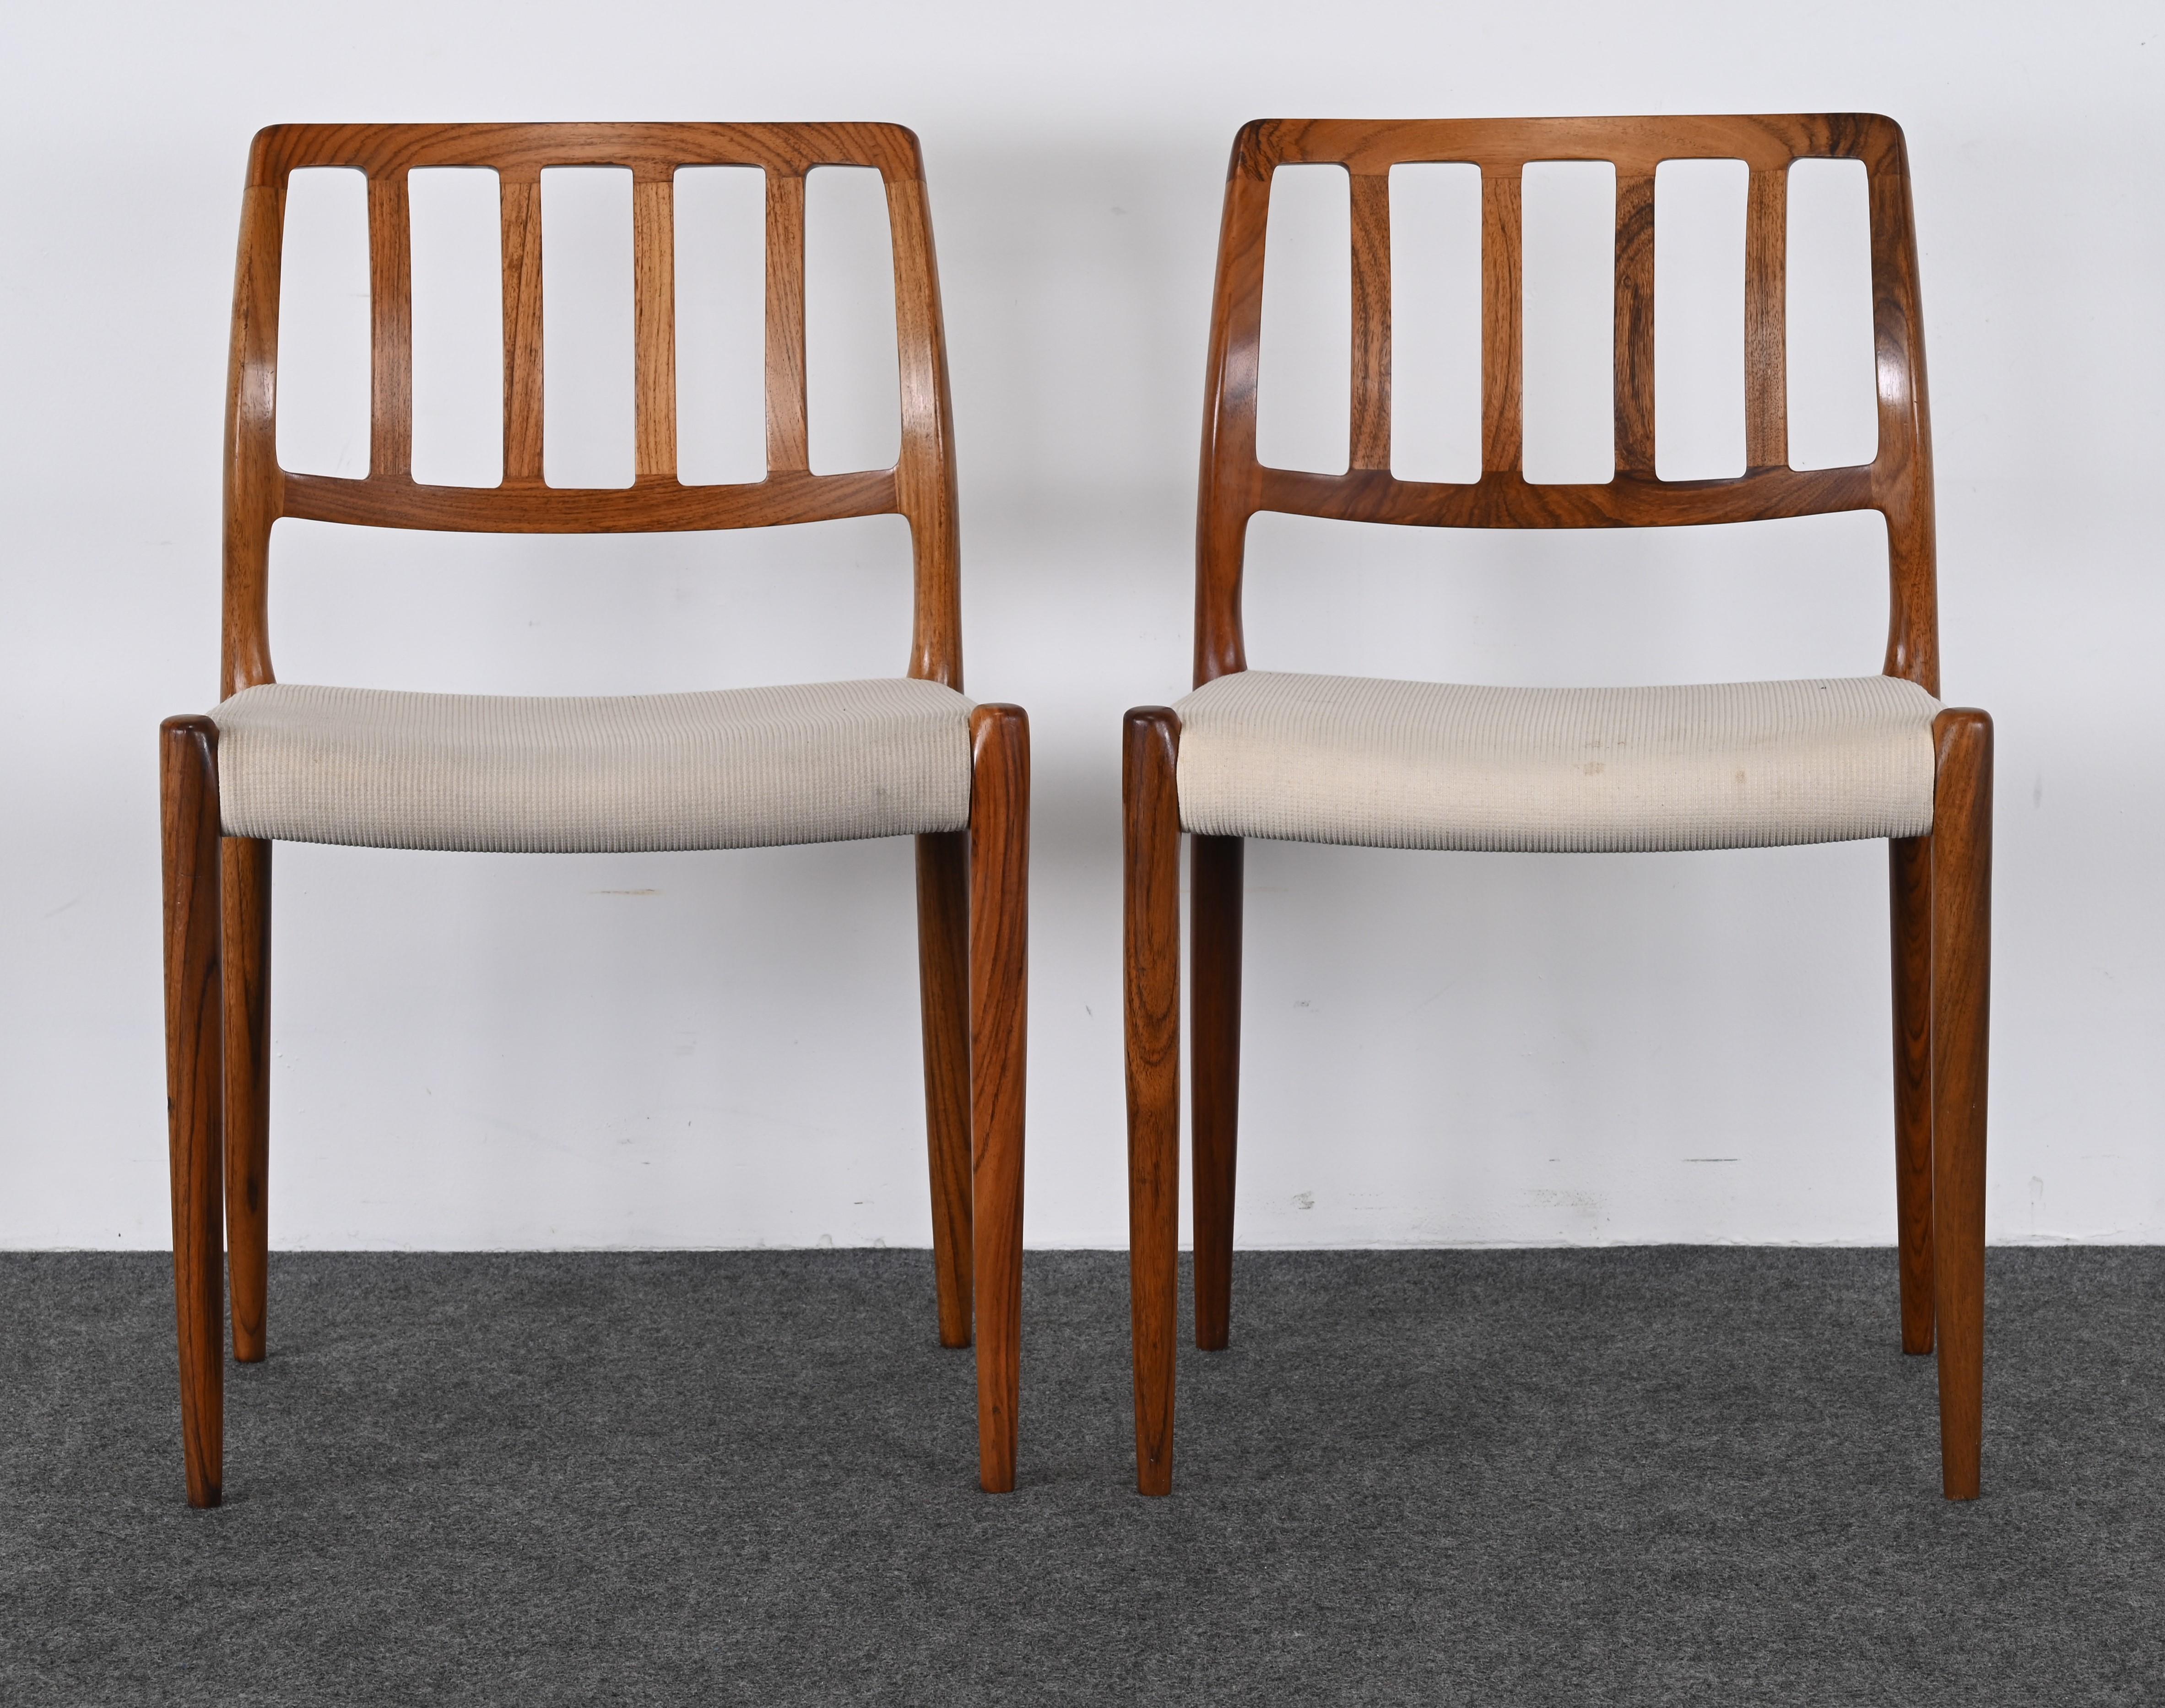 Here is a chance to buy a pair of Rosewood Danish Modern Dining Chairs designed by Niels Otto Moller and manufactured by J. L Moller Model 83. Normally you find these in sets however, if you need a pair to add to your present set of chairs these are